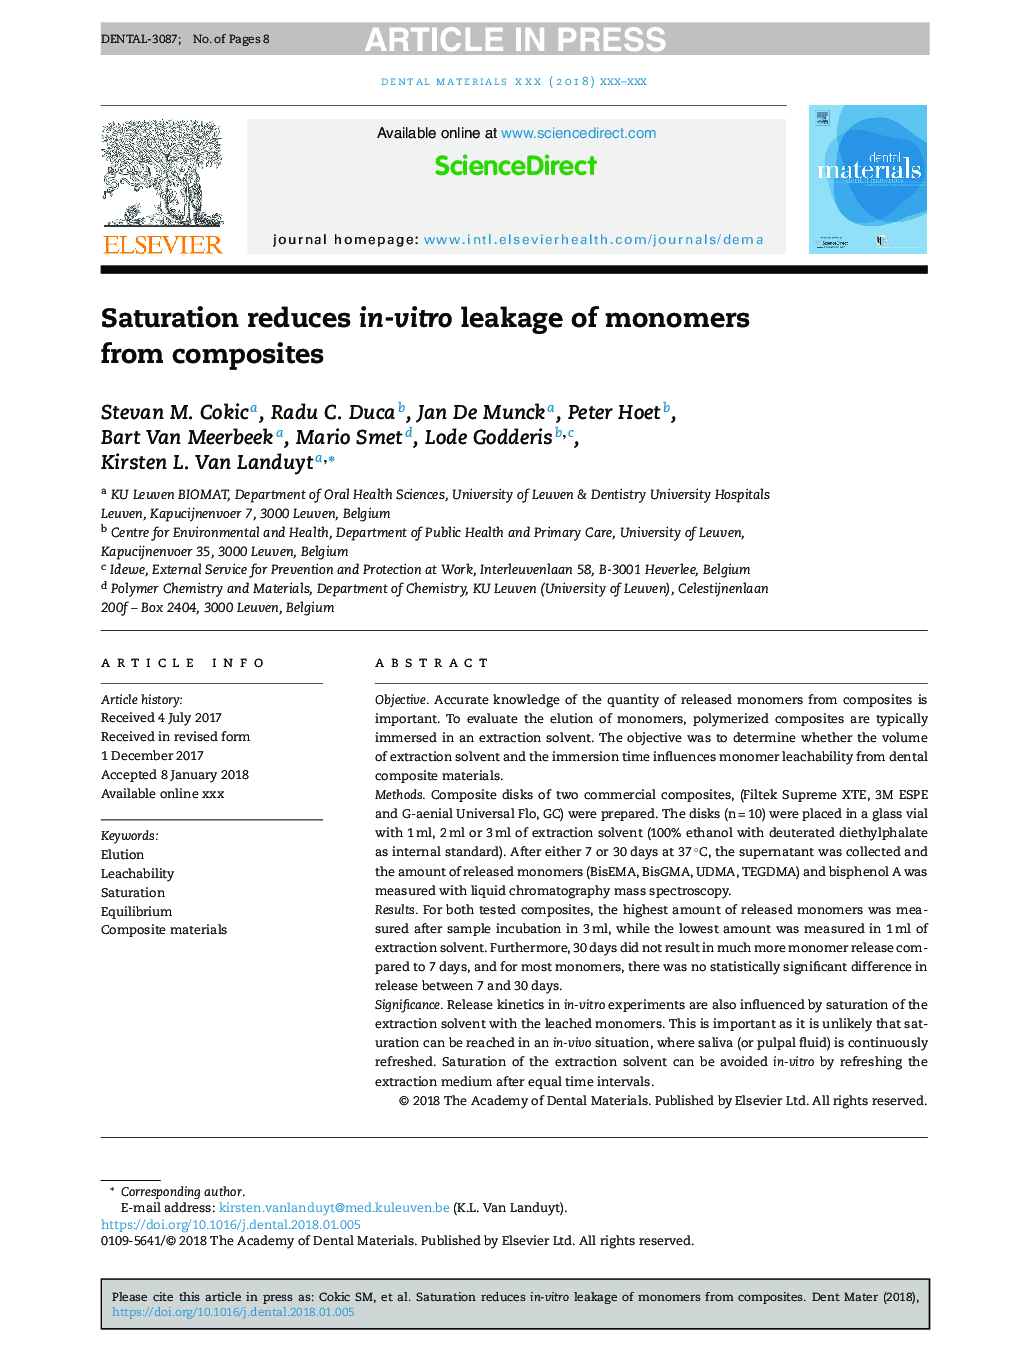 Saturation reduces in-vitro leakage of monomers from composites